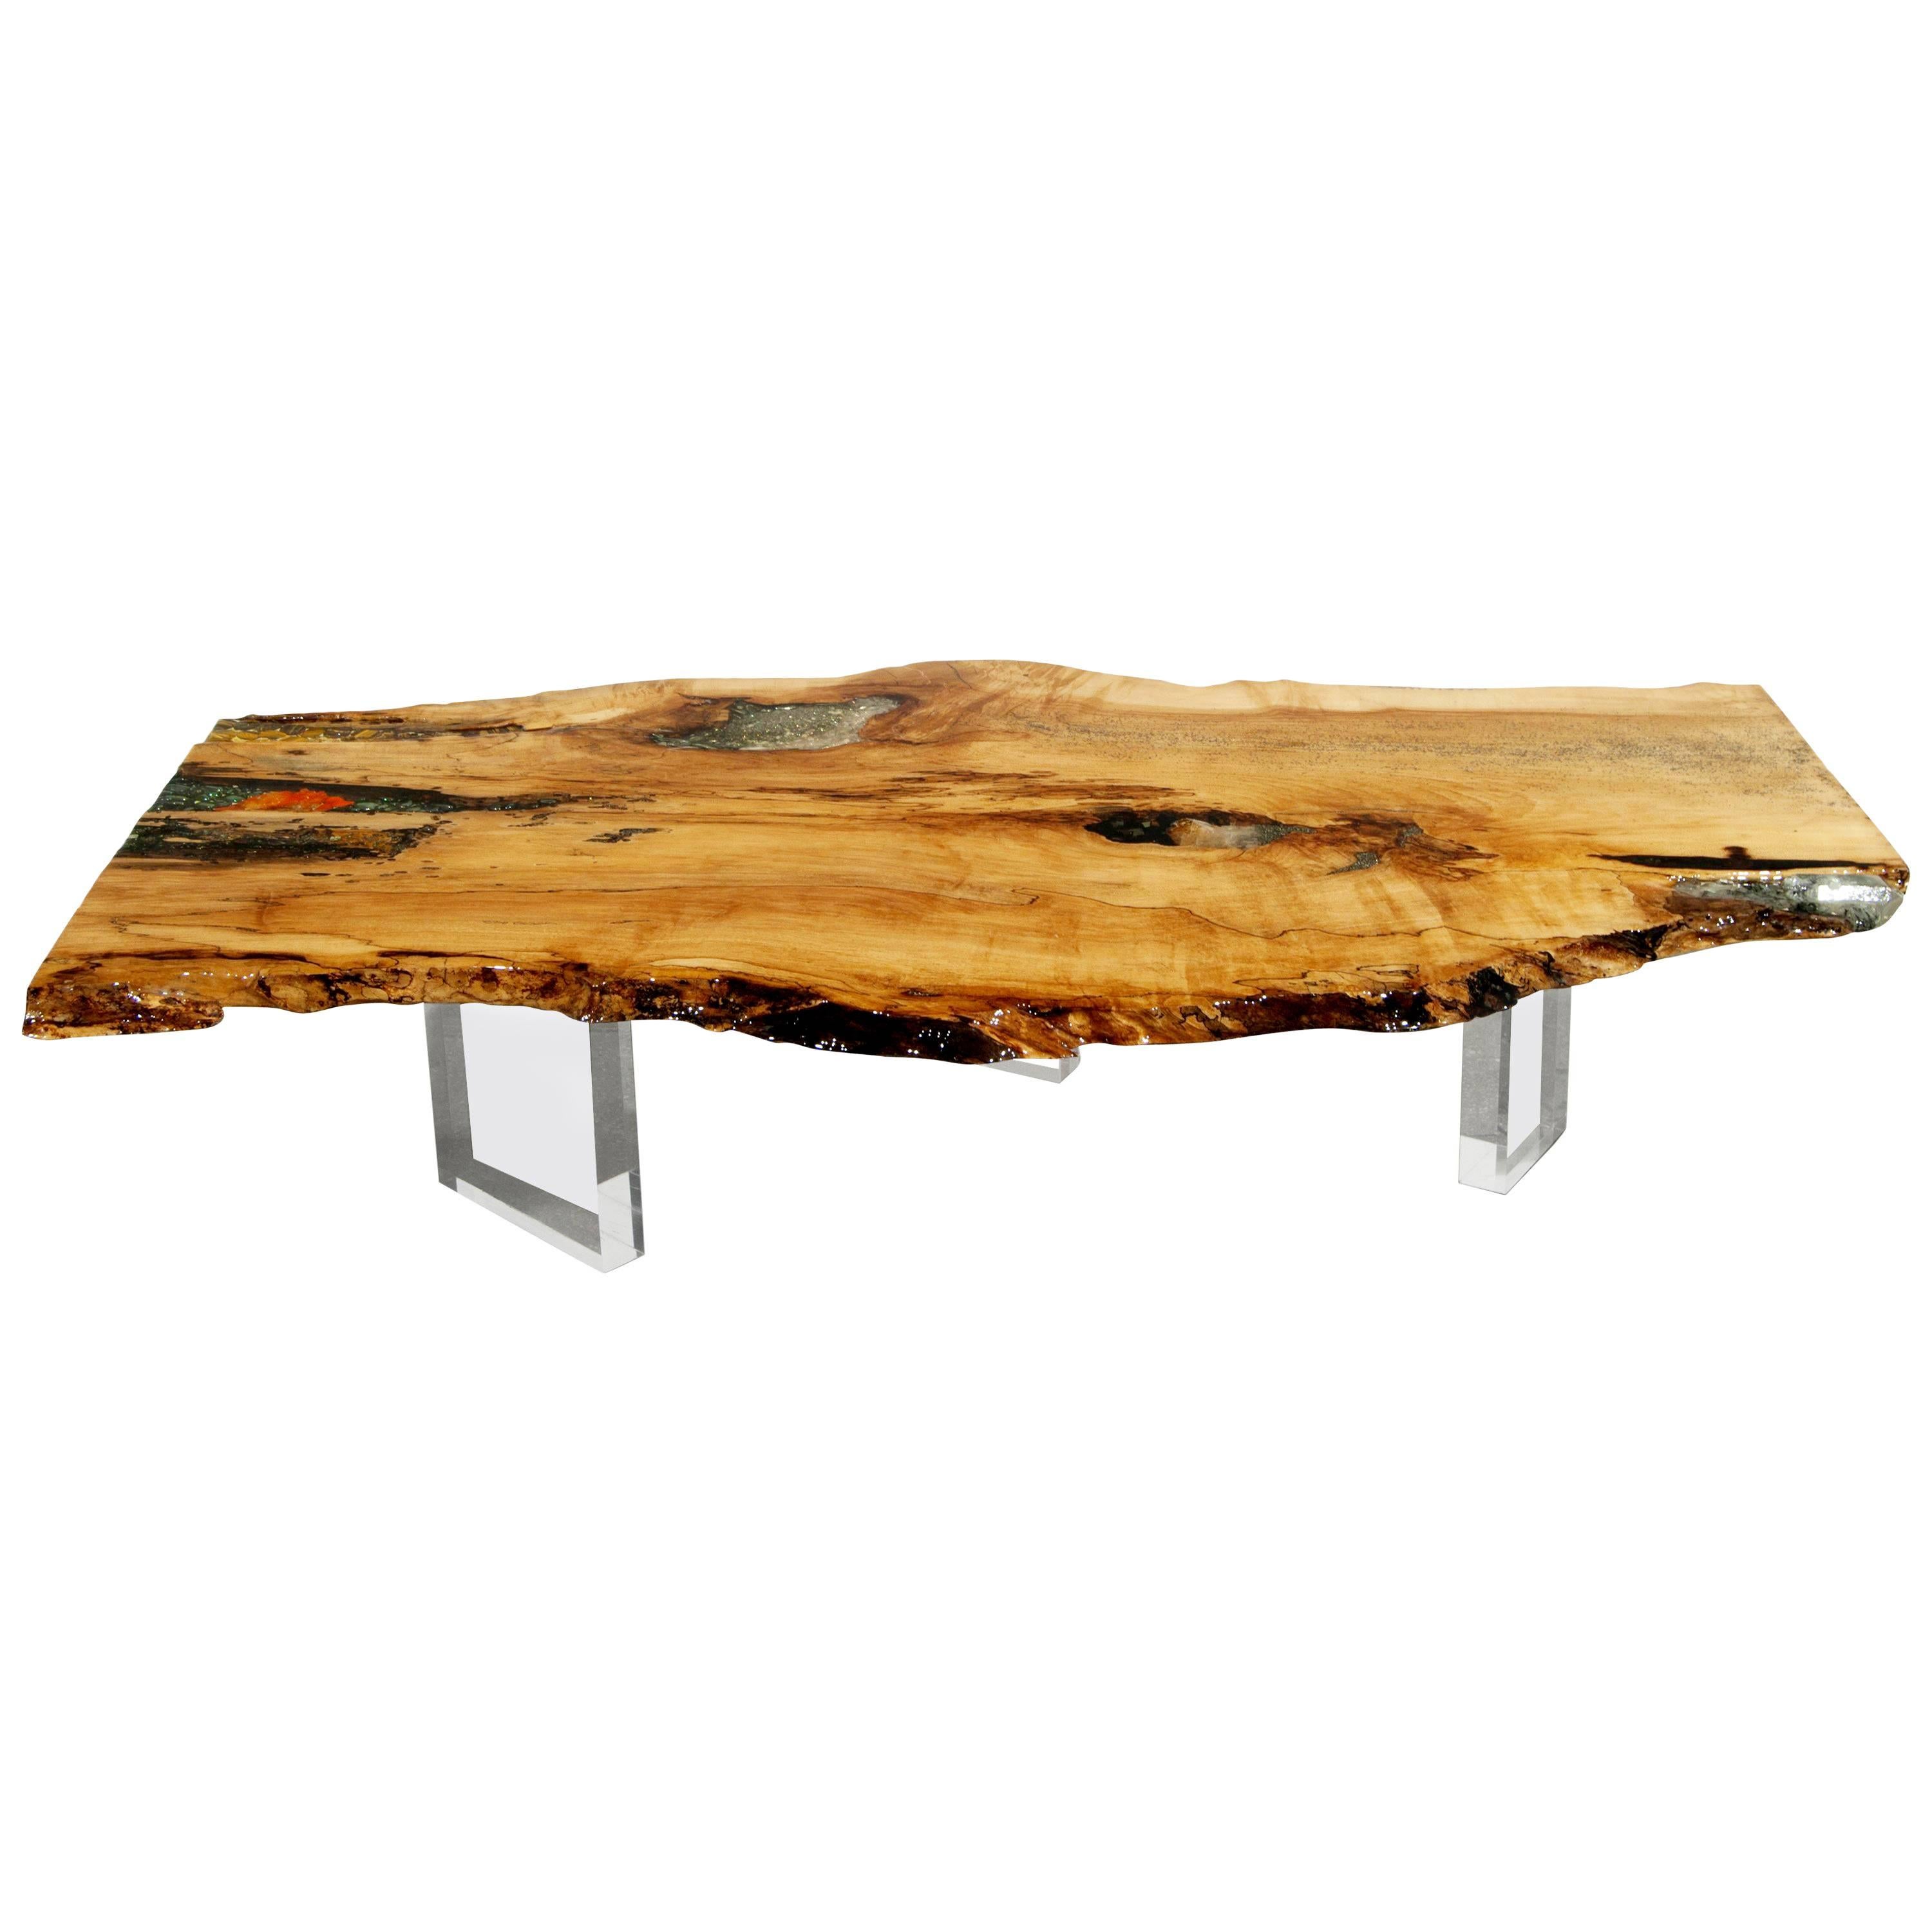 Honey Maple coffee table in wood with stone inlay